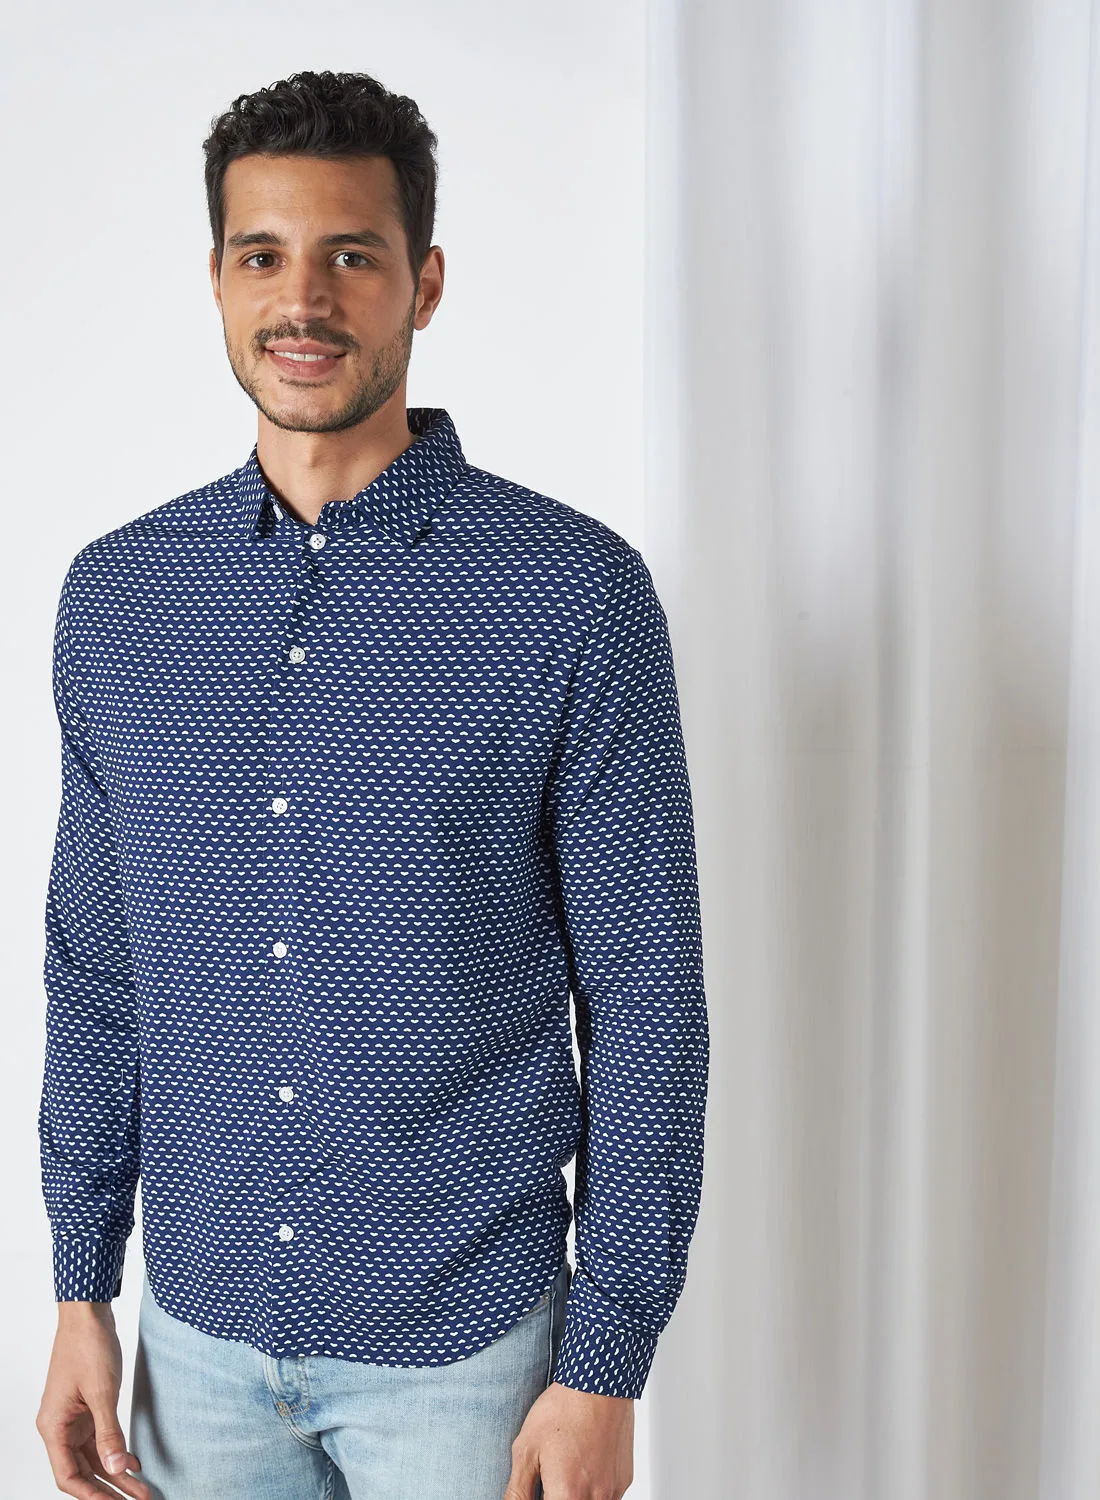 STATE 8 All-Over Print Shirt Navy